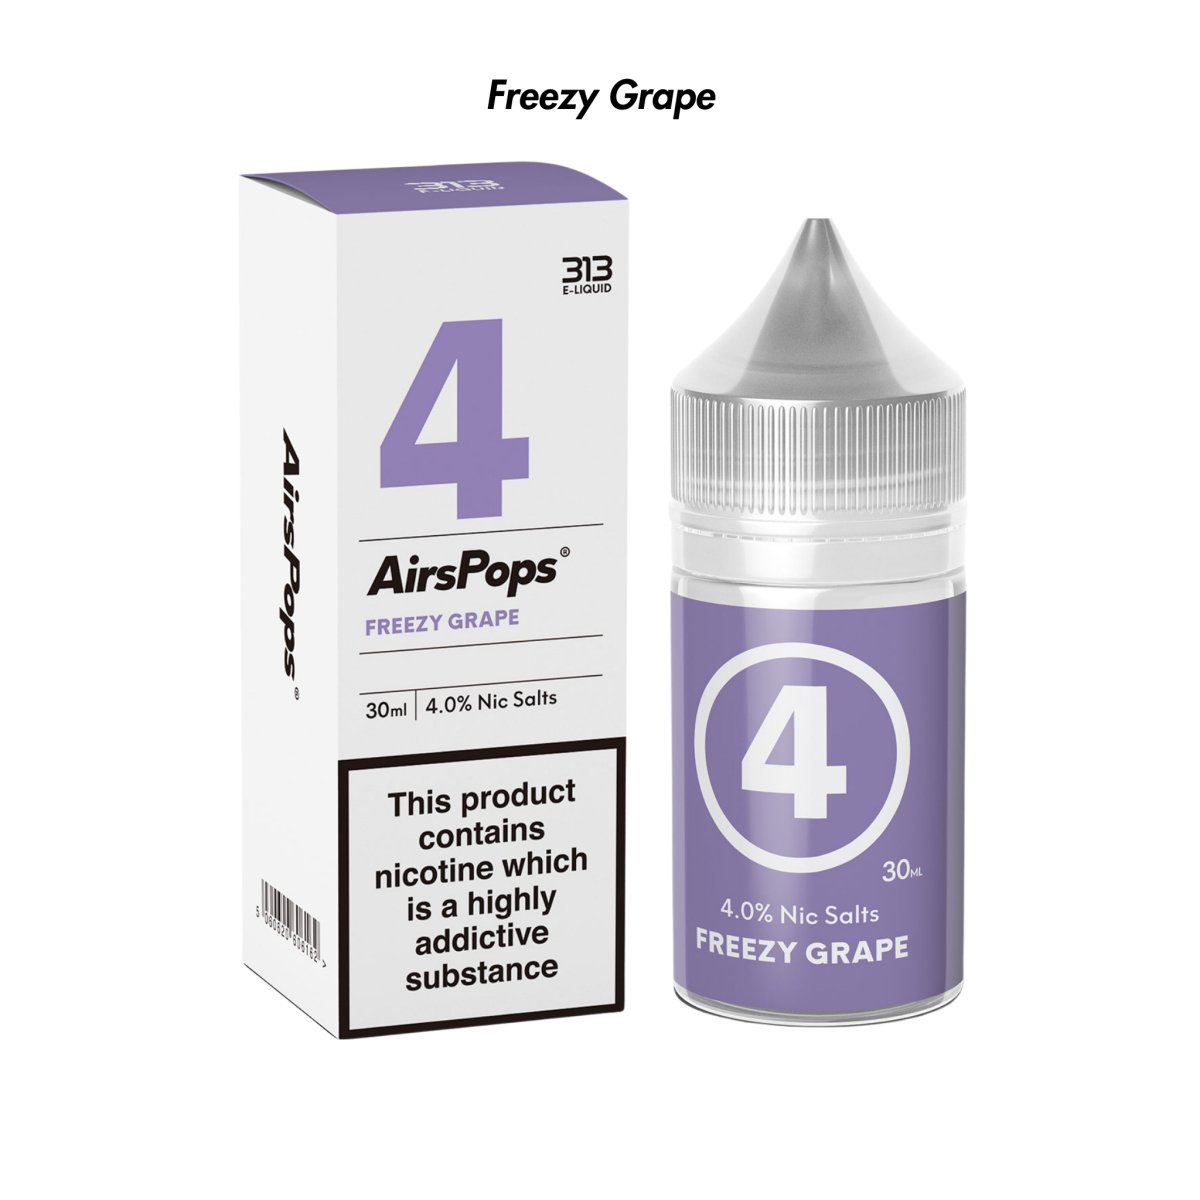 Freezy Grape Prefilled Airscream 1/7 Pods from The Smoke Organic Store with Fast Delivery in South Africa